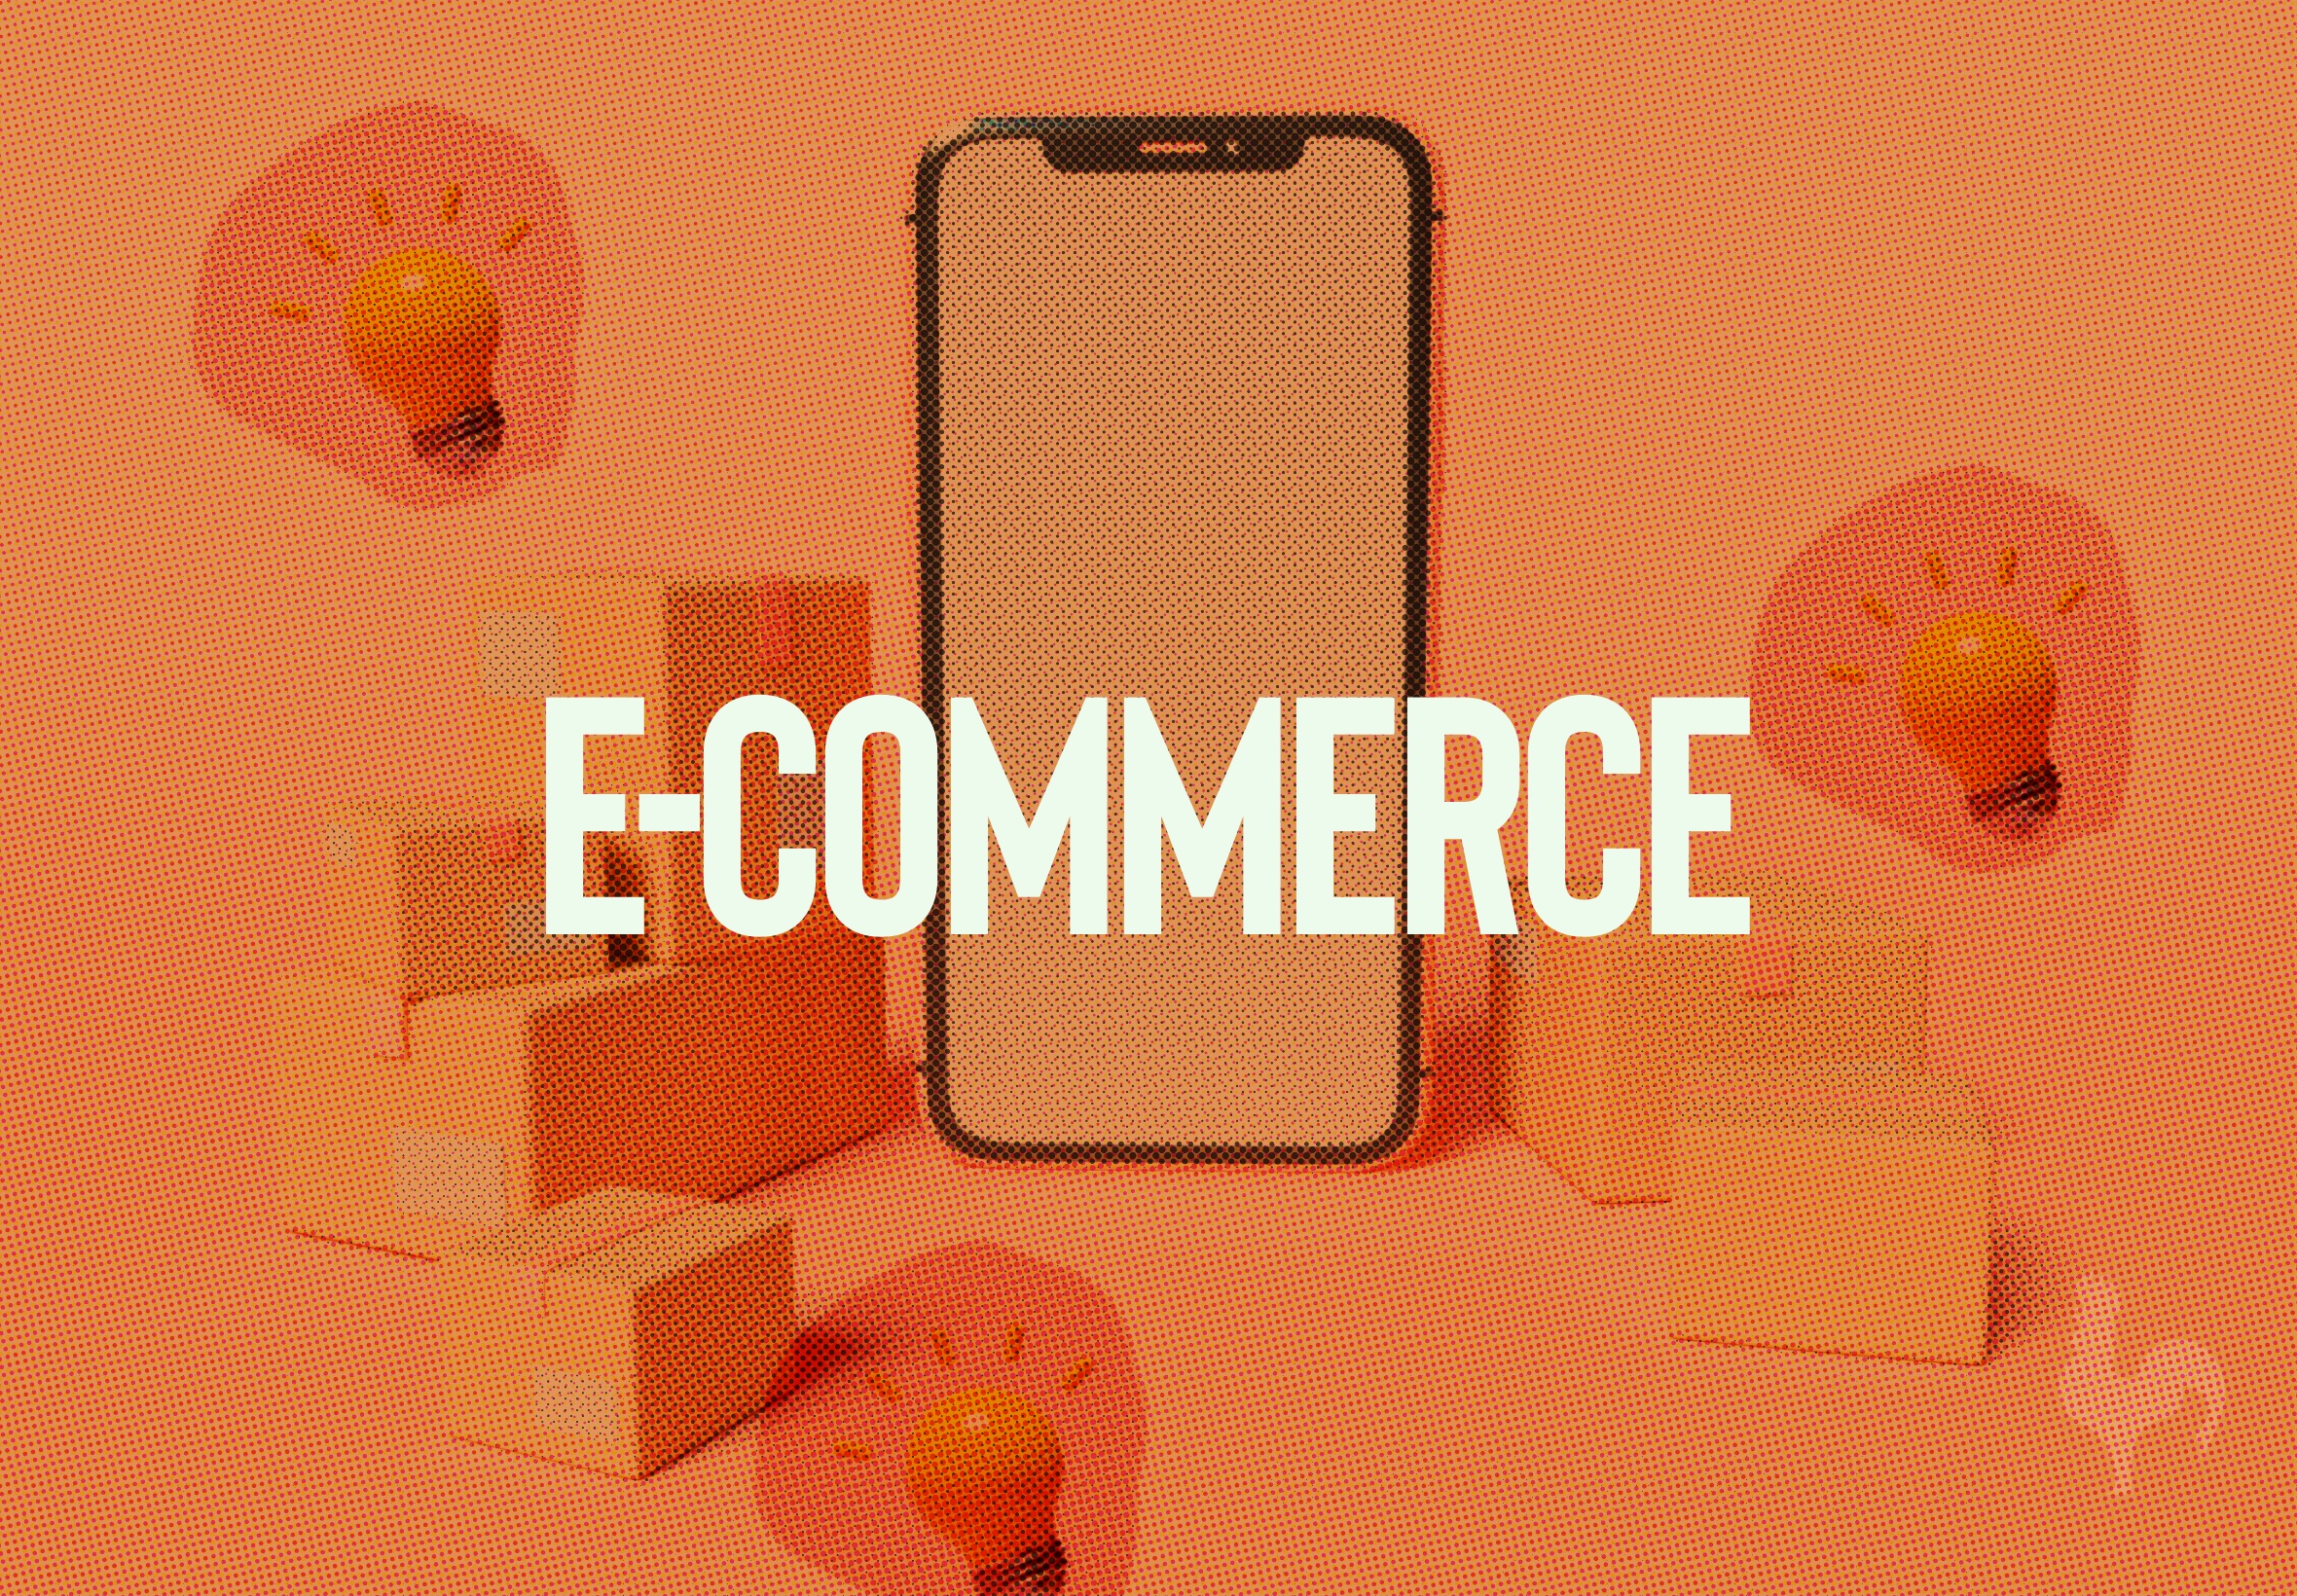 10 Tips for a Successful E-Commerce Website